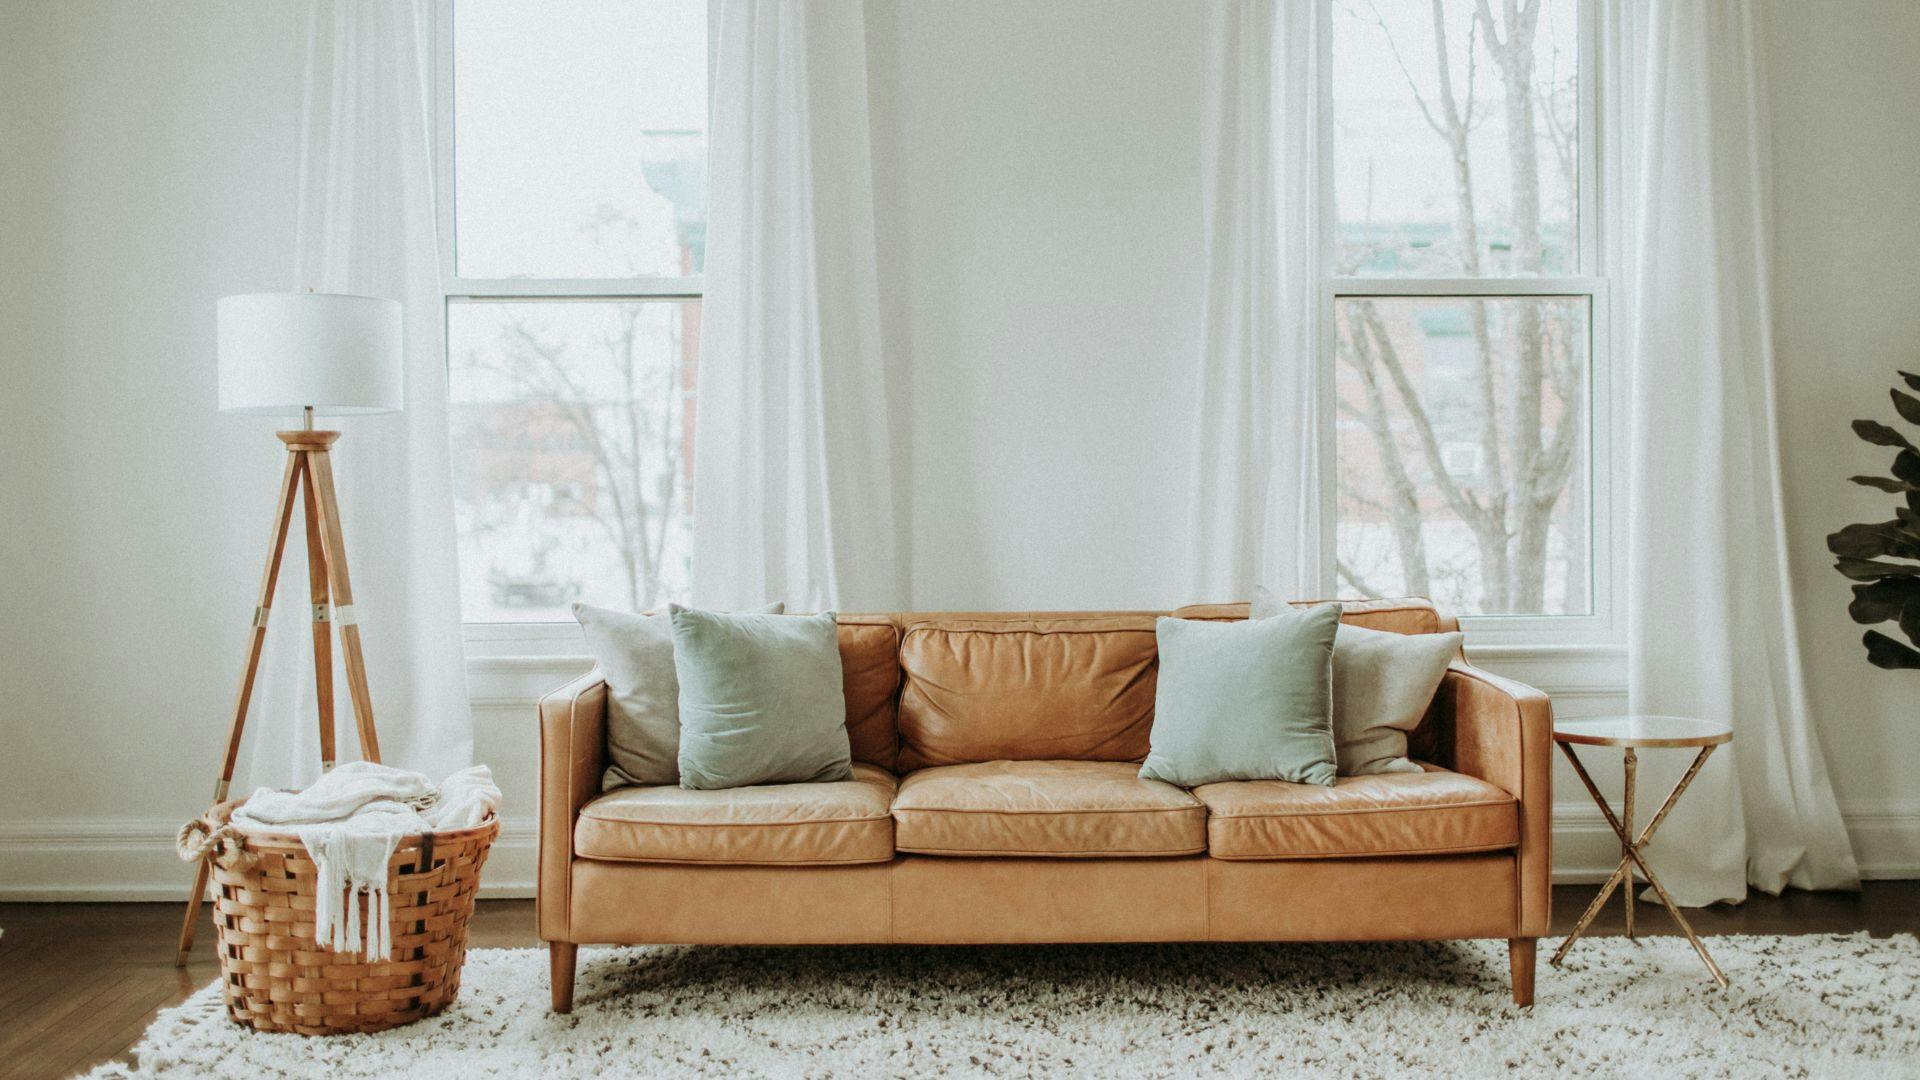 How to Match Your Sofa & Curtains for a Cohesive Look